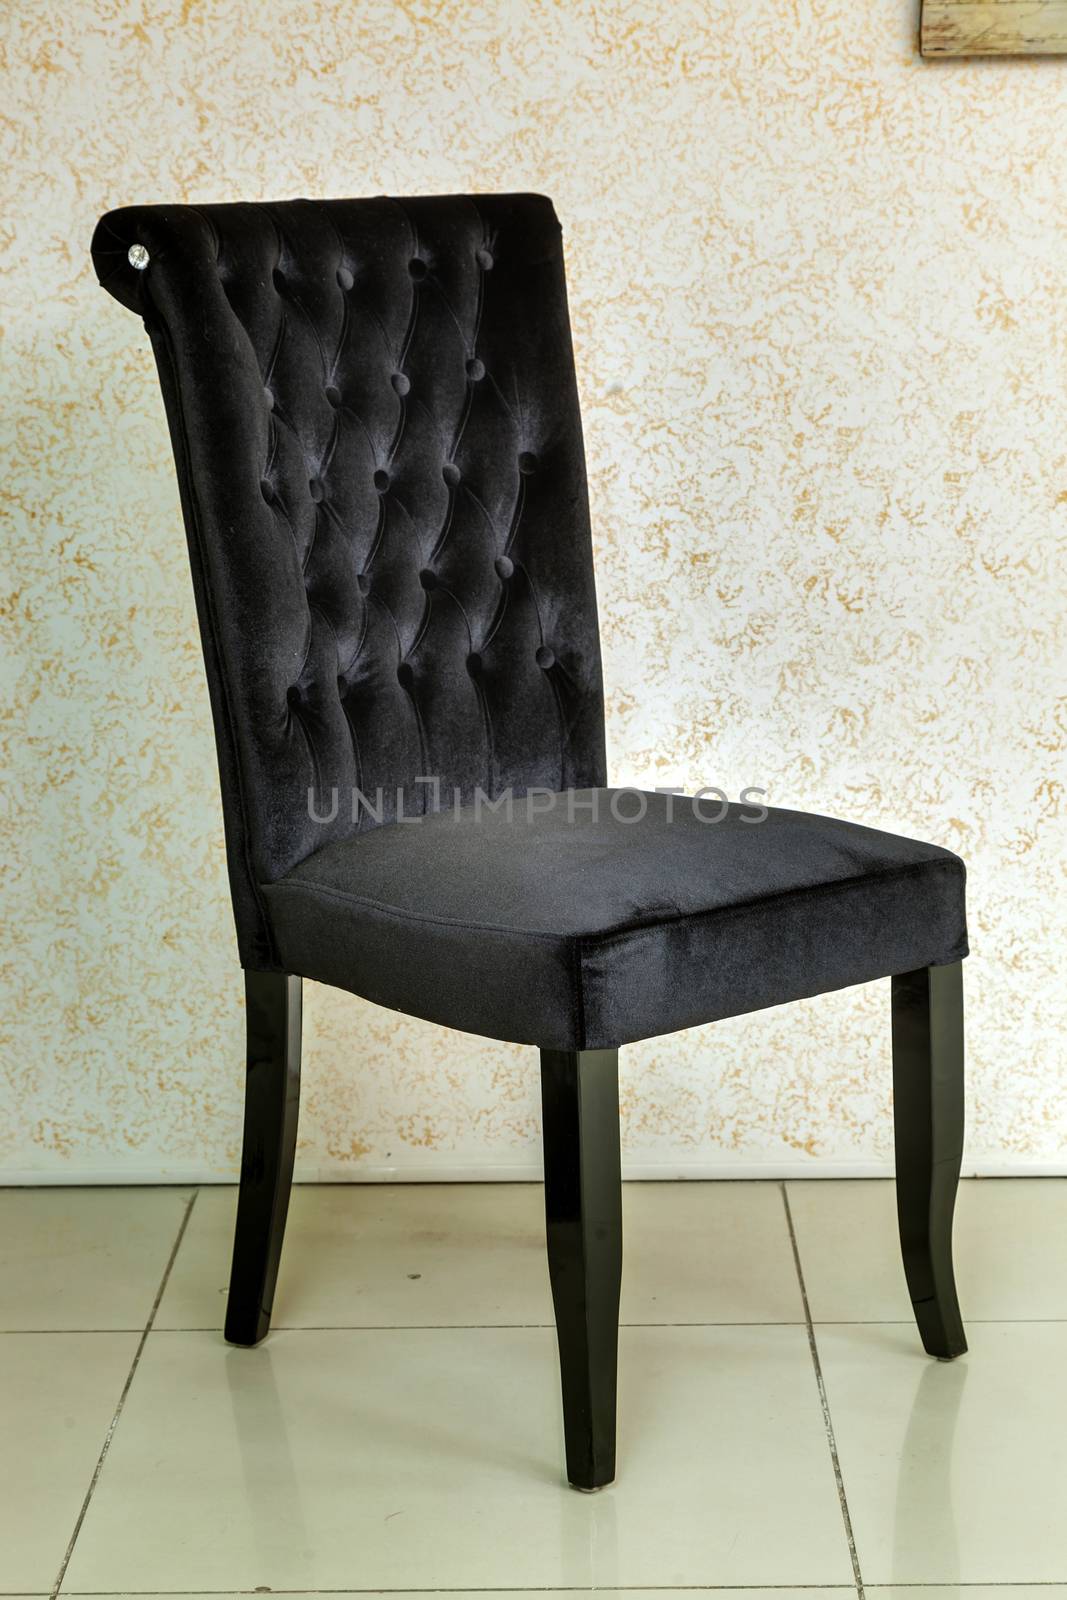 magnificent black chair an upholstery textile in the room